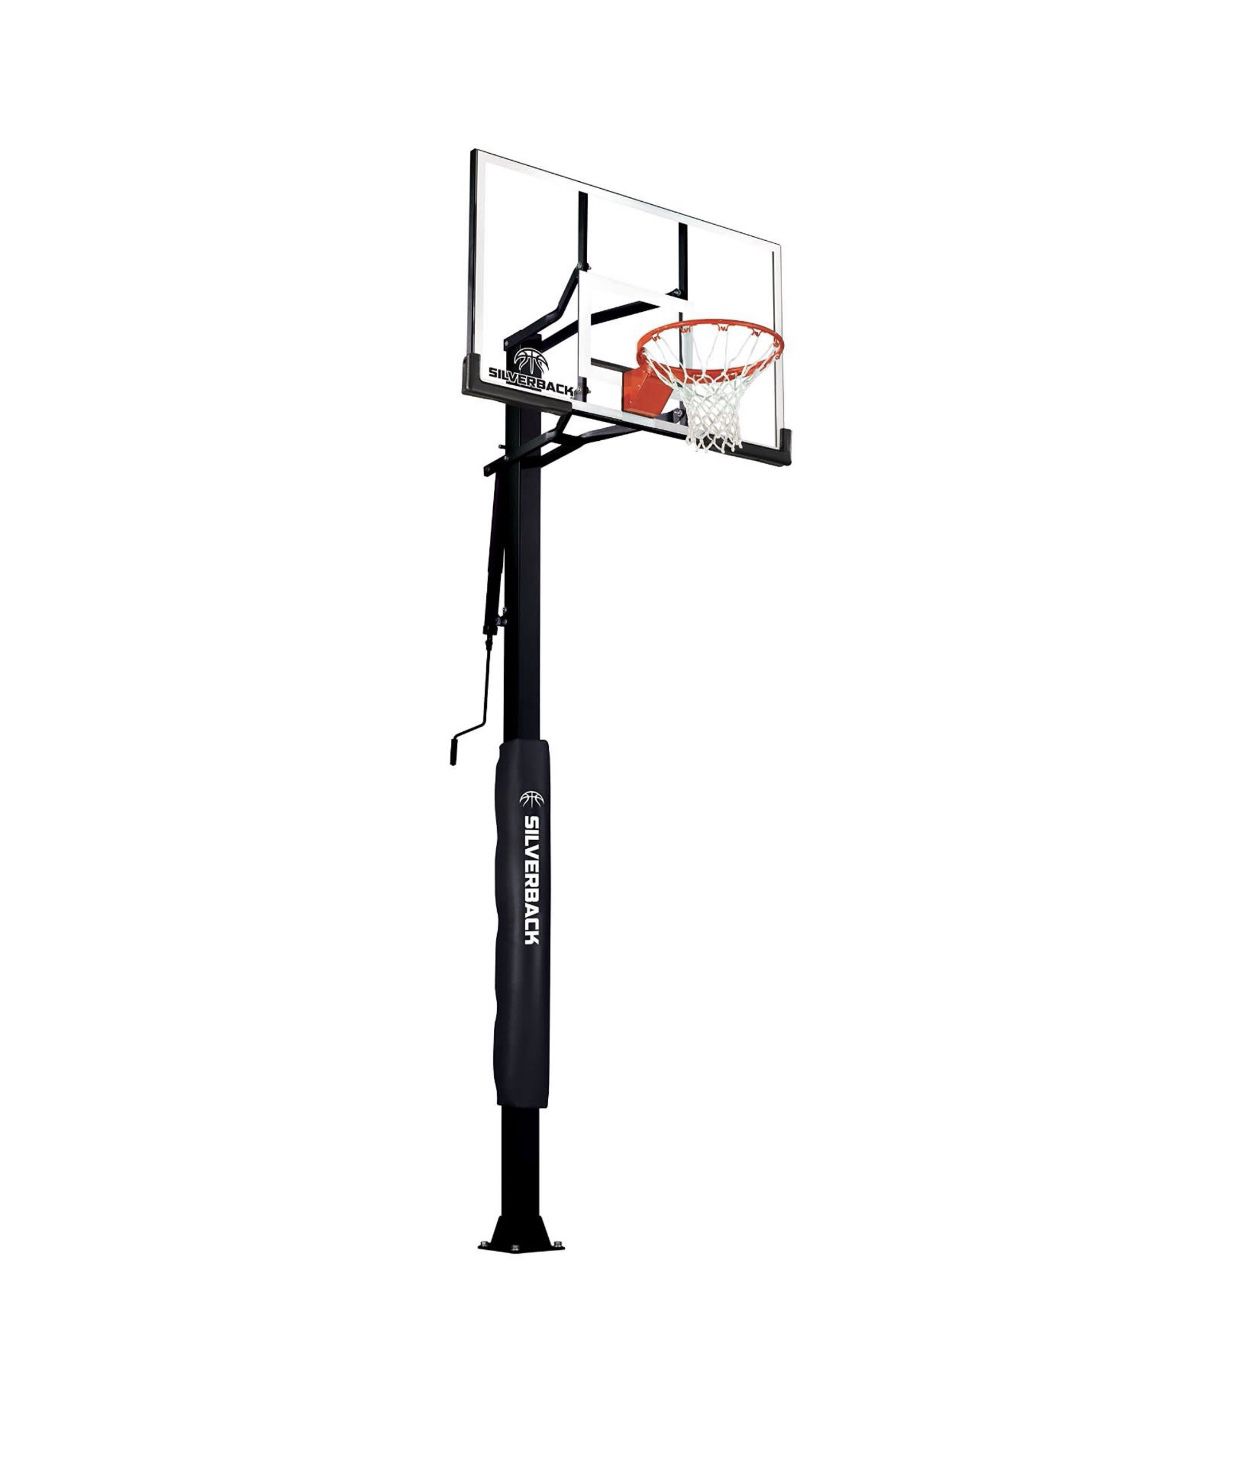 New In Box Silverback SB60, our premier in-ground basketball hoop